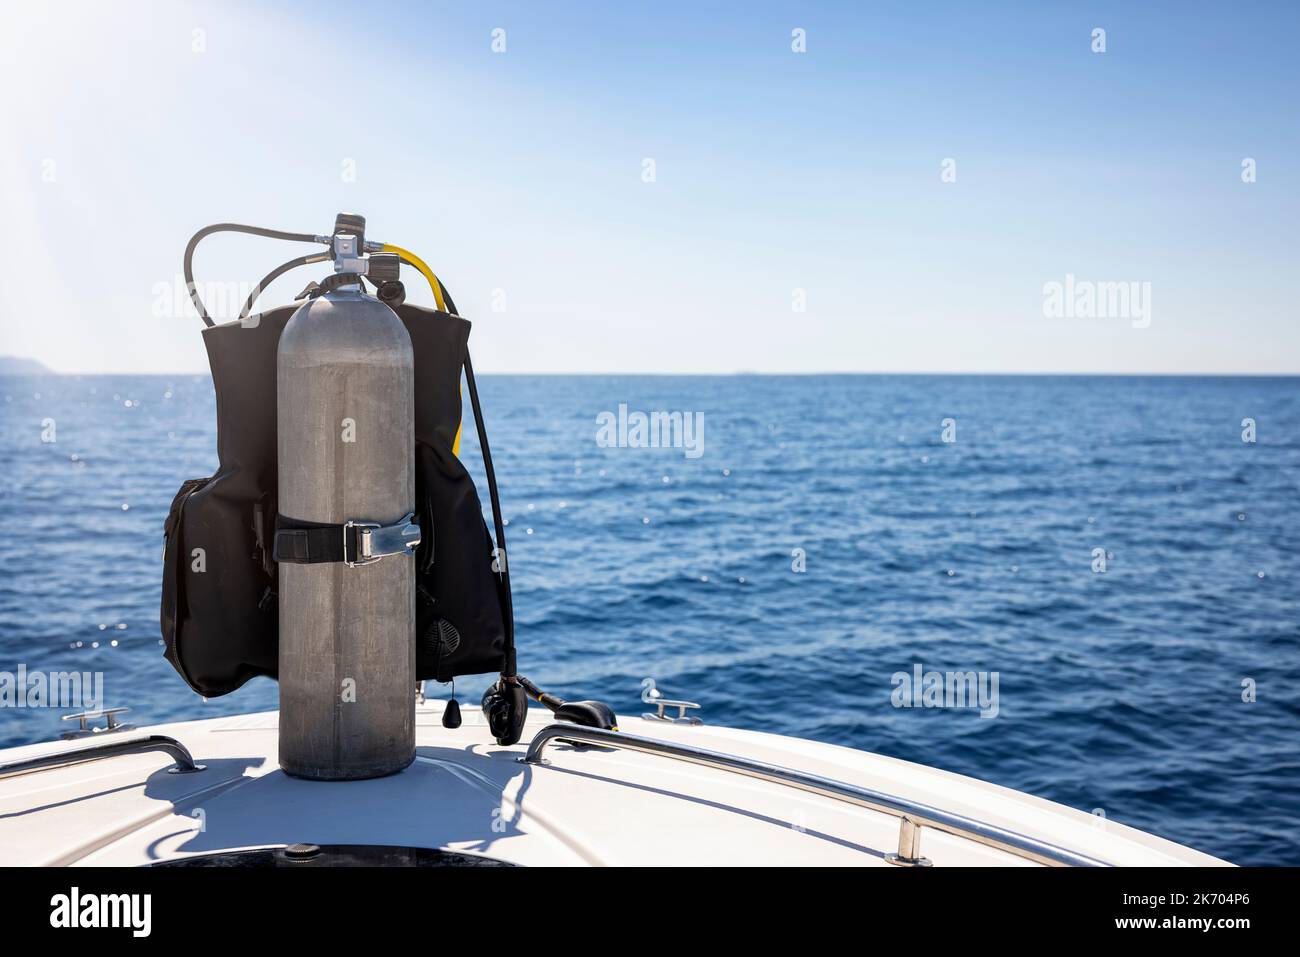 A scuba diving tank and gear standing on a boat Stock Photo